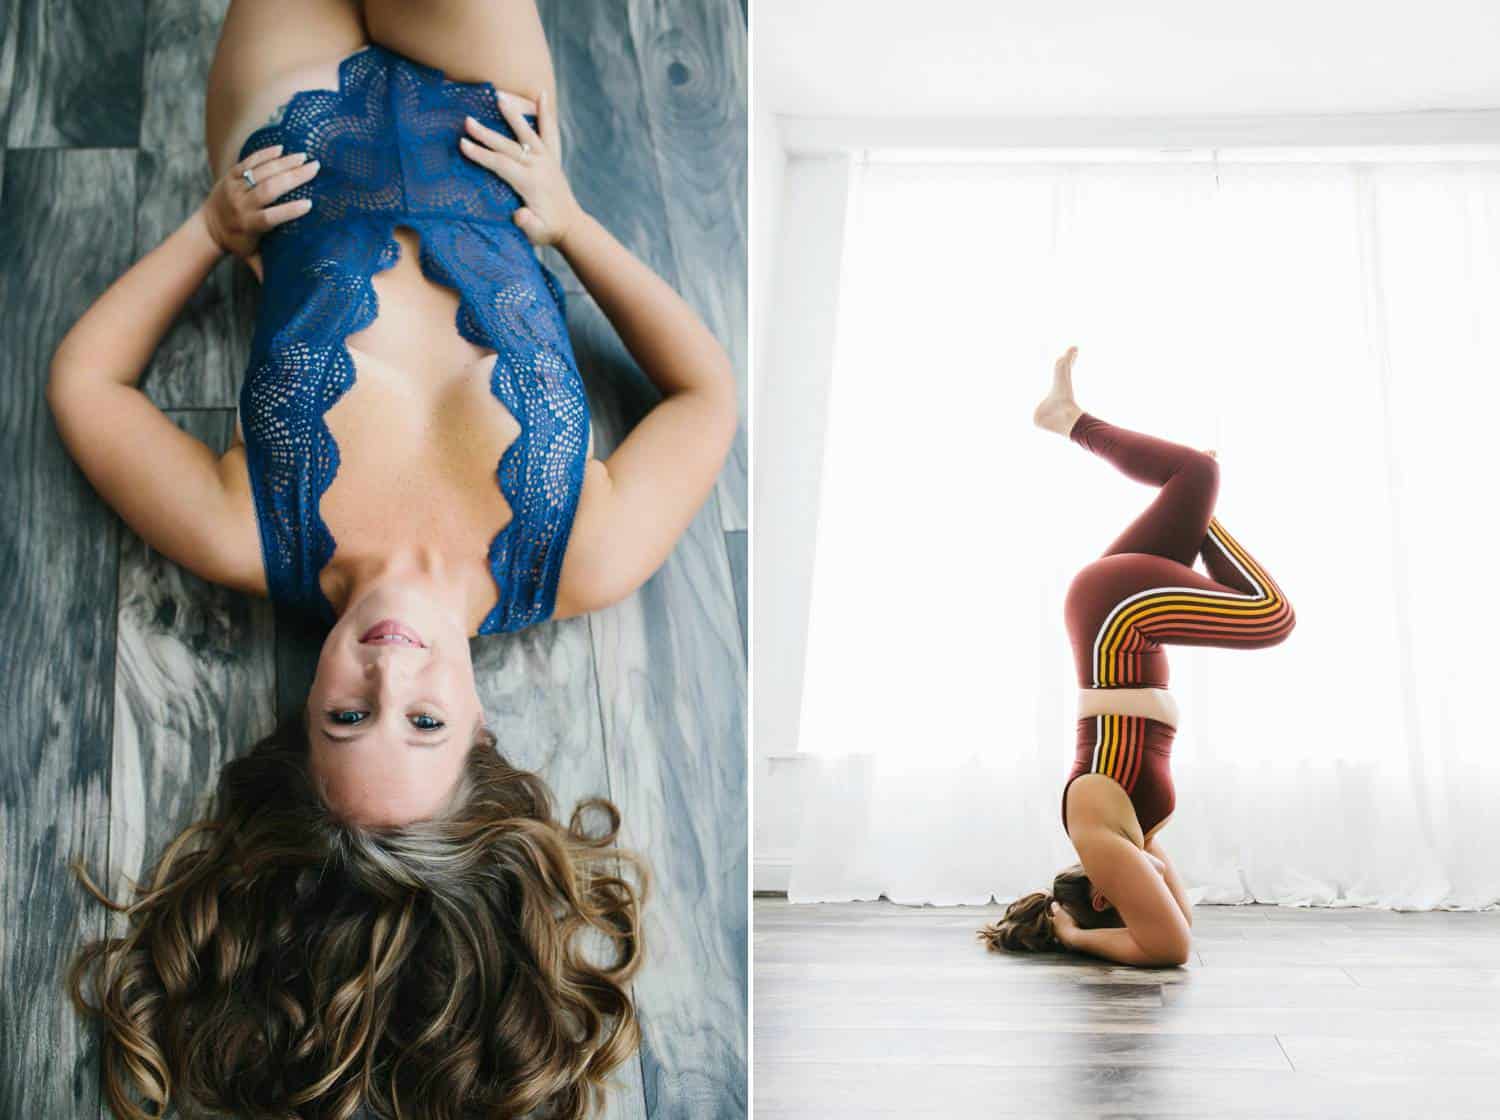 A woman is photographed twice: once lying on her back in blue lingerie, and once doing a headstand in front of a window while wearing burgundy yoga attire.